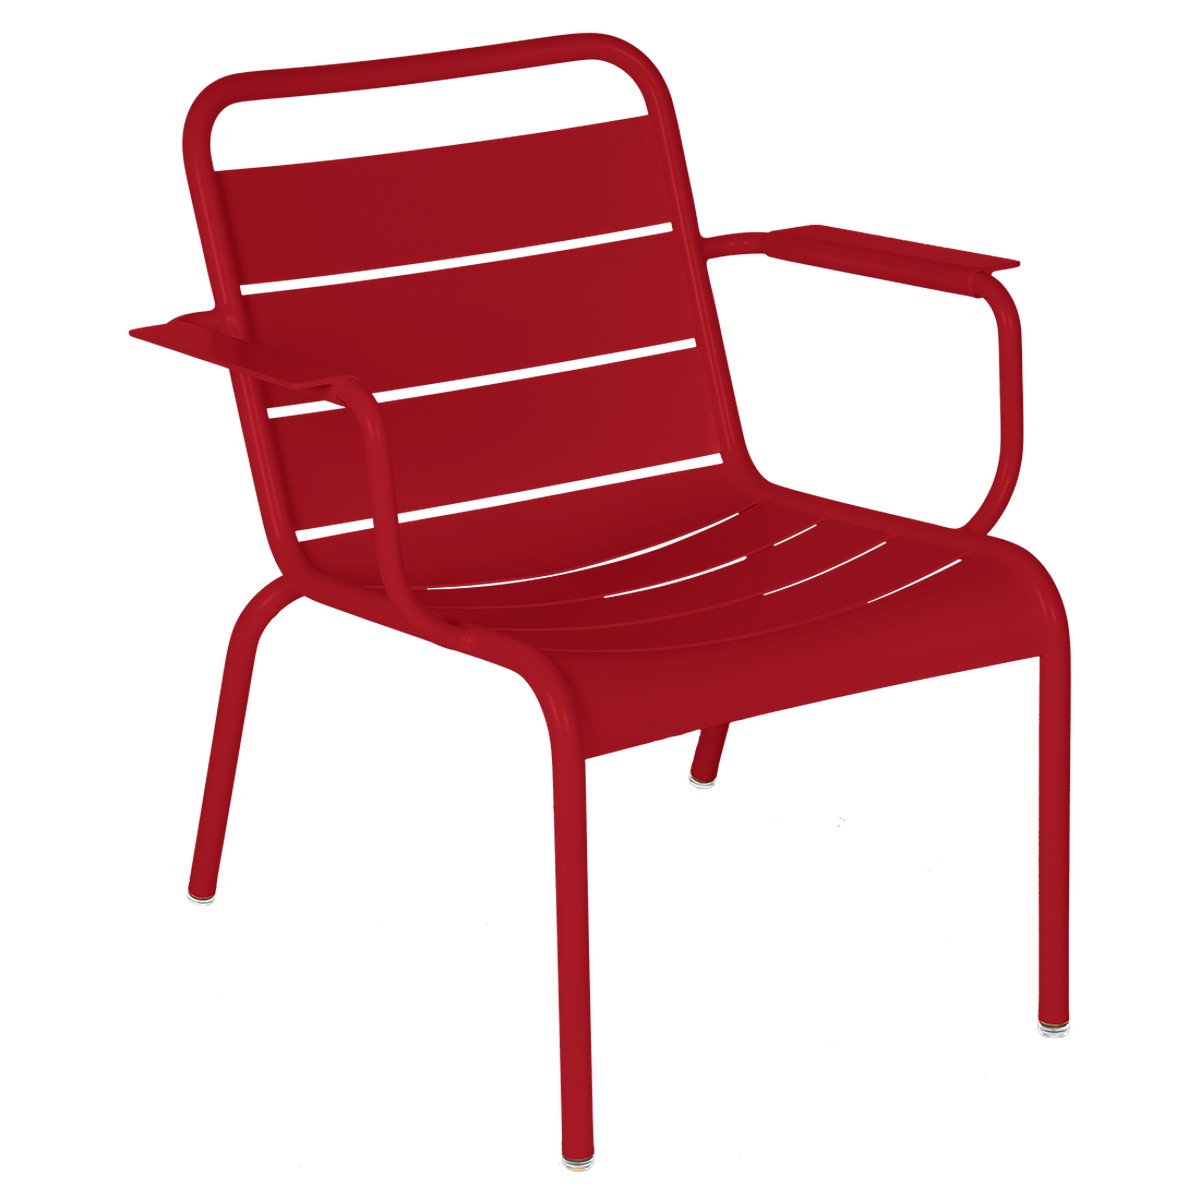 Fermob Luxembourg Fauteuil Lounge Luxembourg Rouge groseille L 72.8 x l 71 x H73.9cm